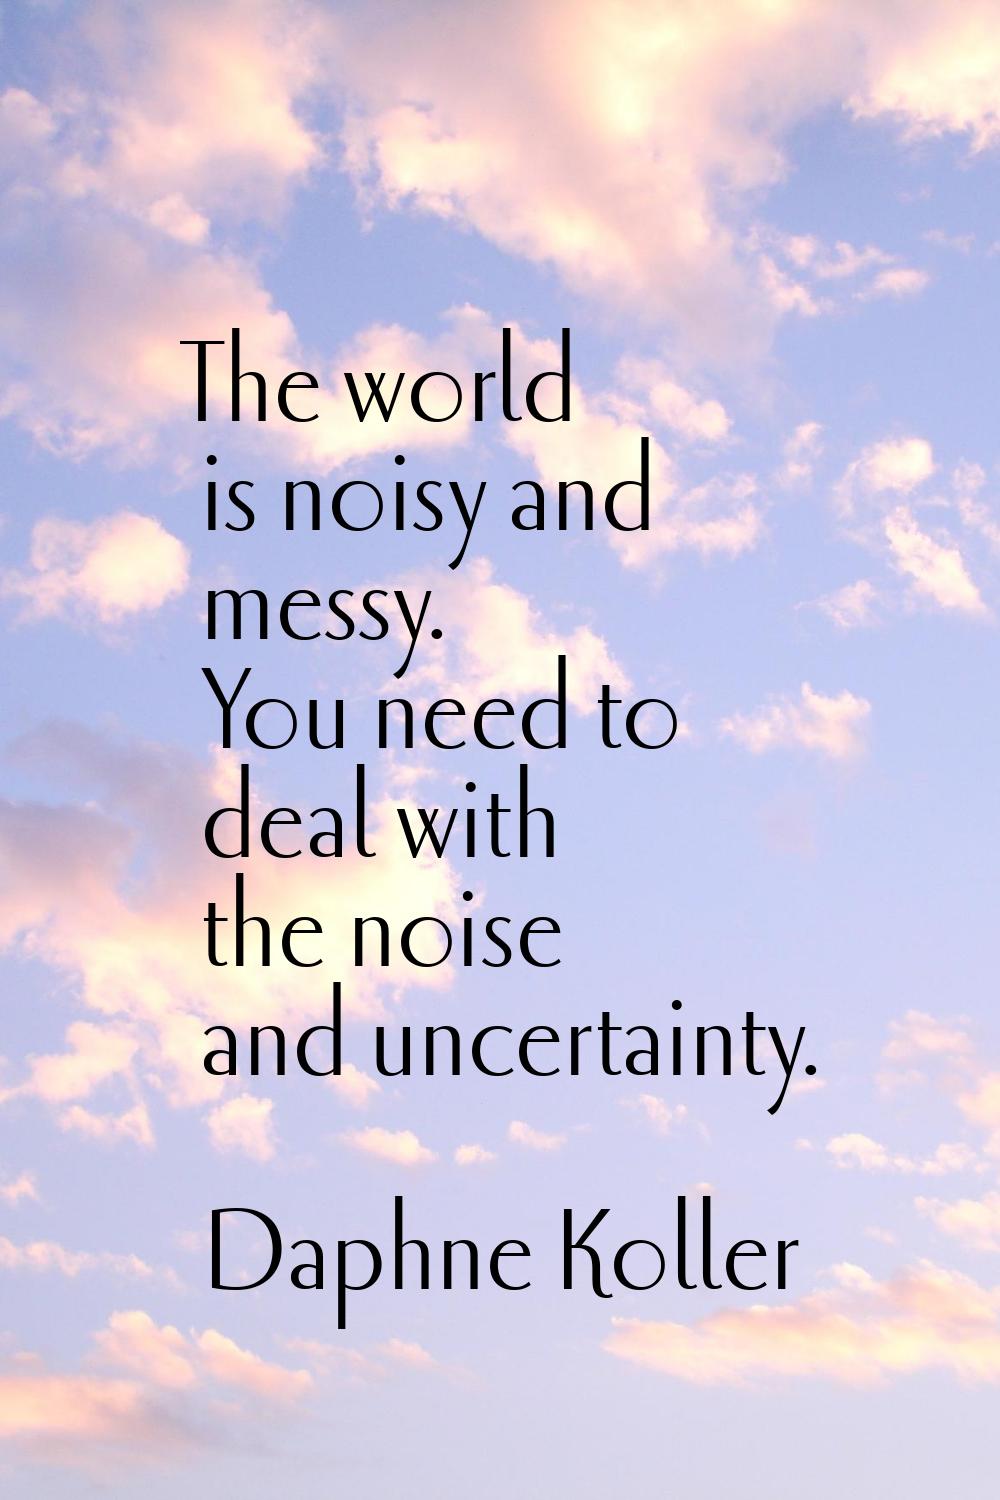 The world is noisy and messy. You need to deal with the noise and uncertainty.